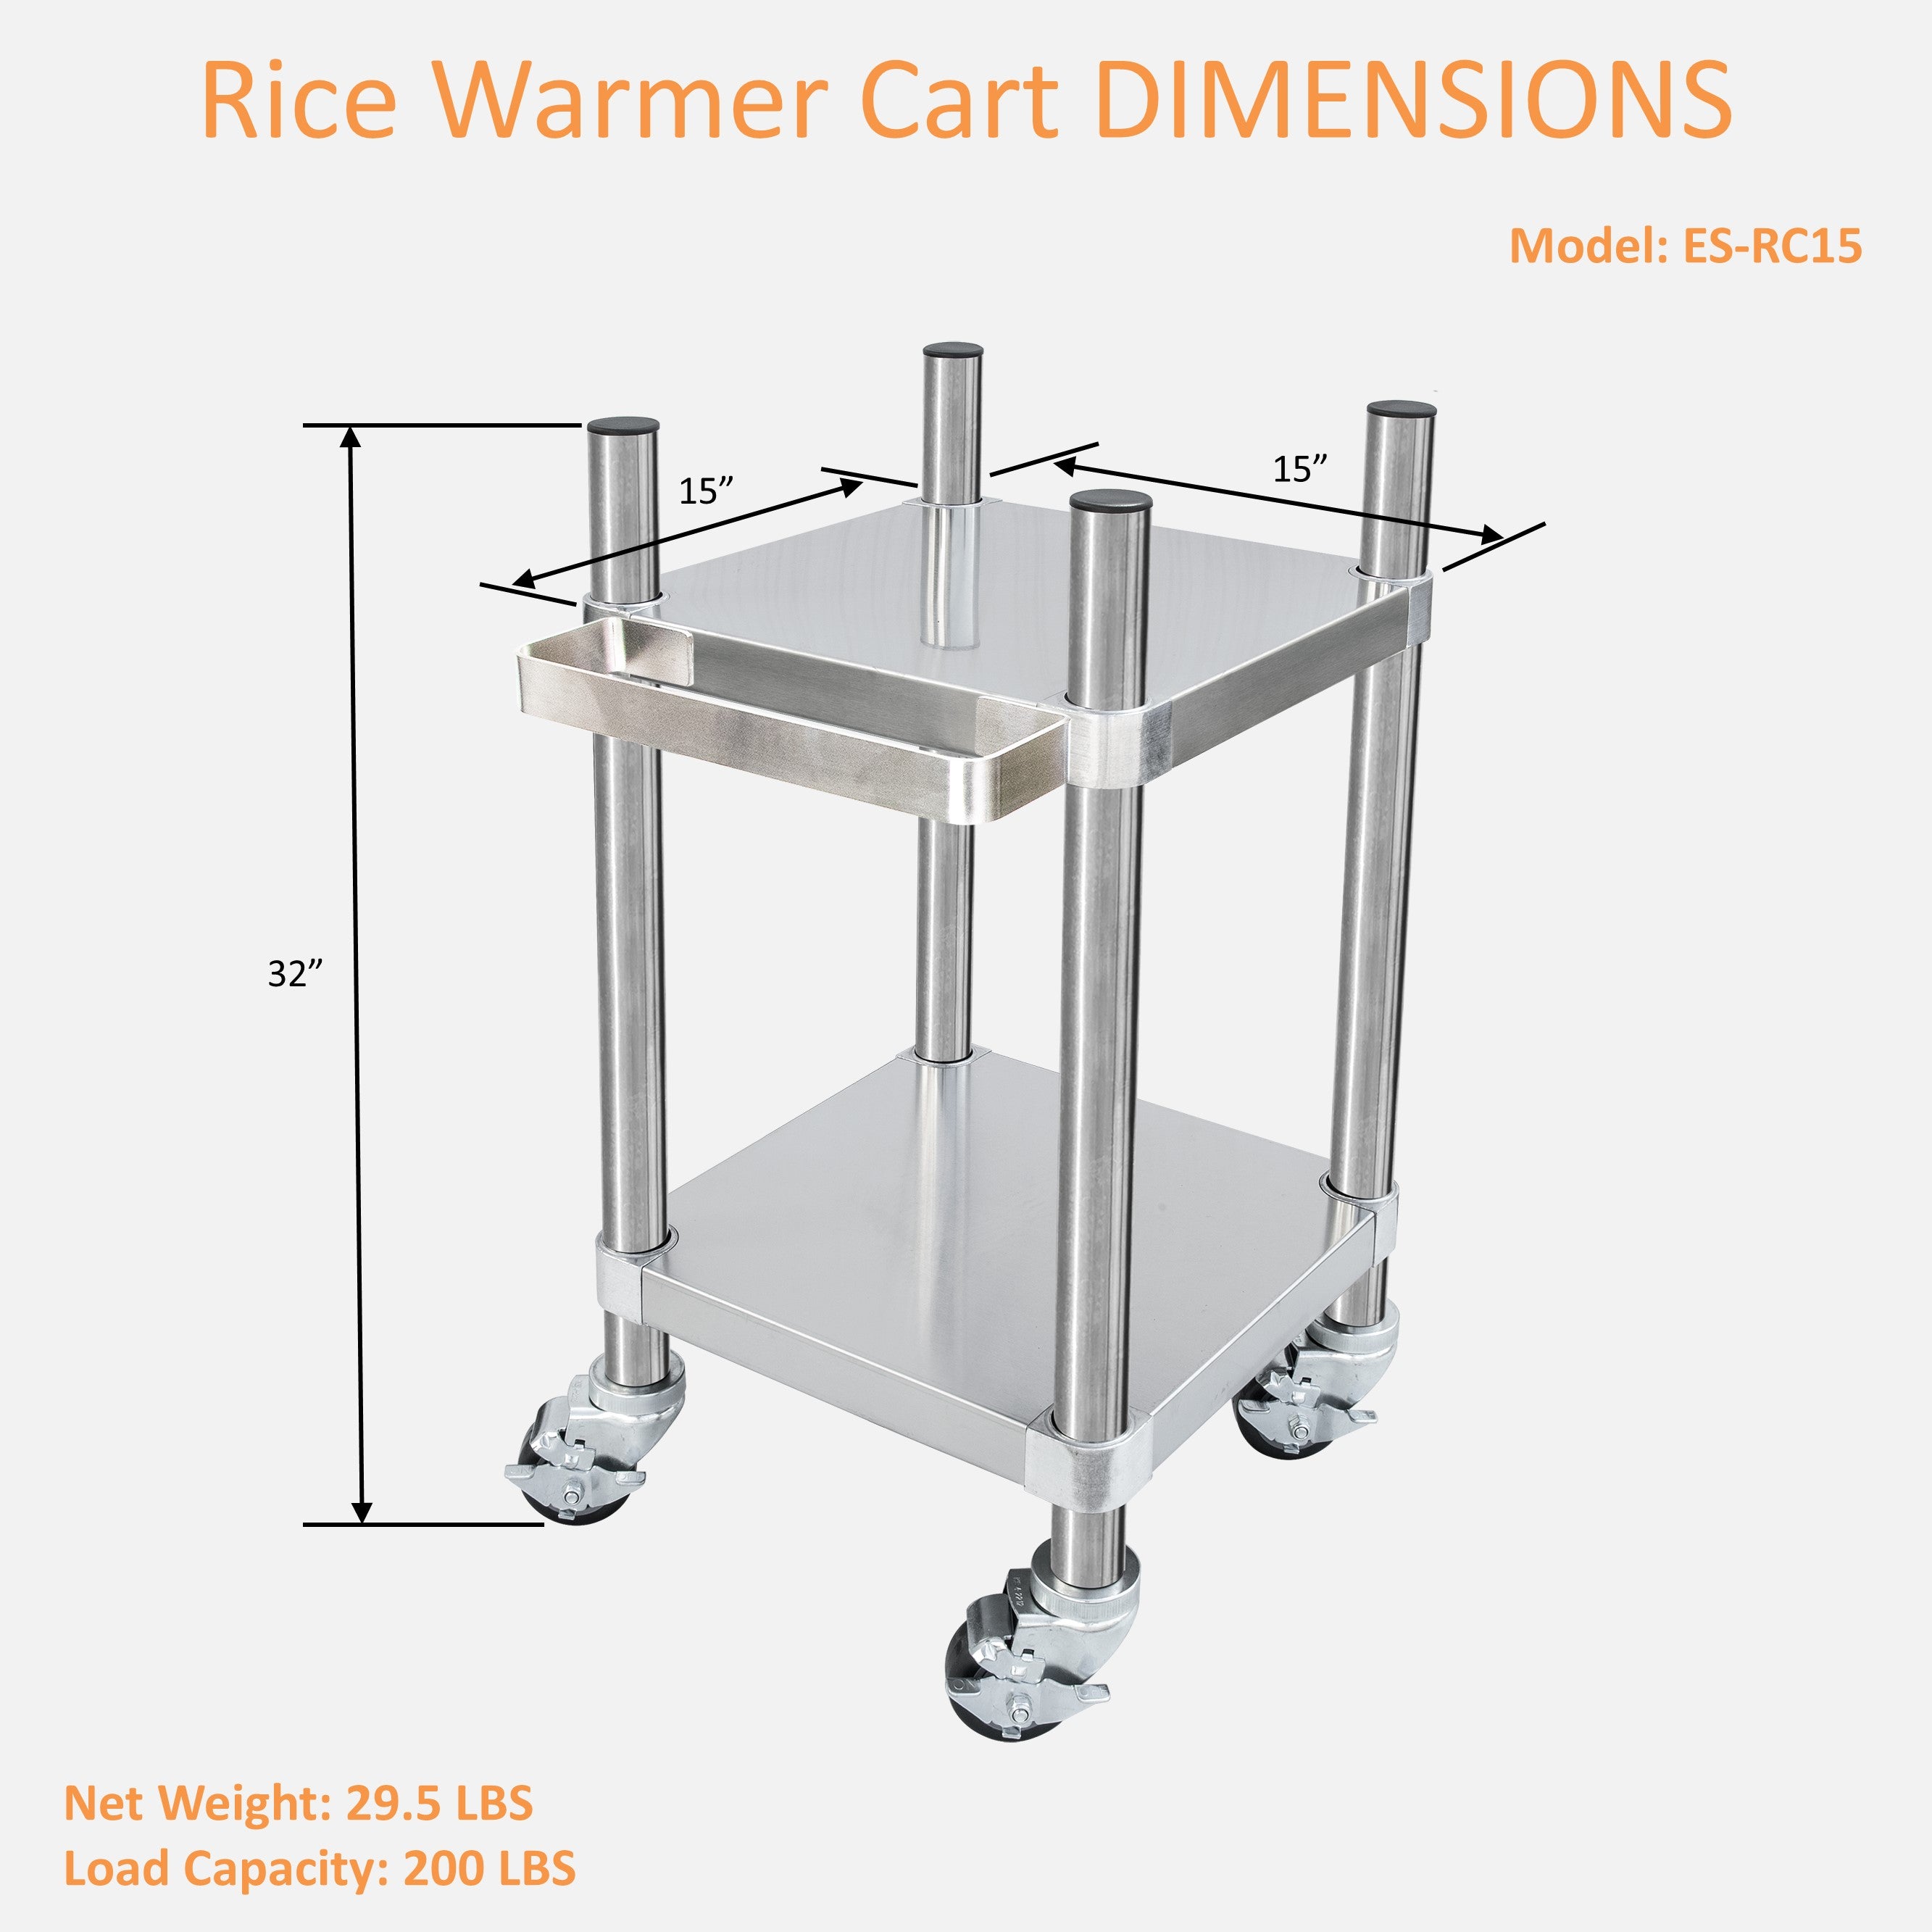 GSW Stainless Steel Top Rice Warmer Cart, 15" x 15" x 32"